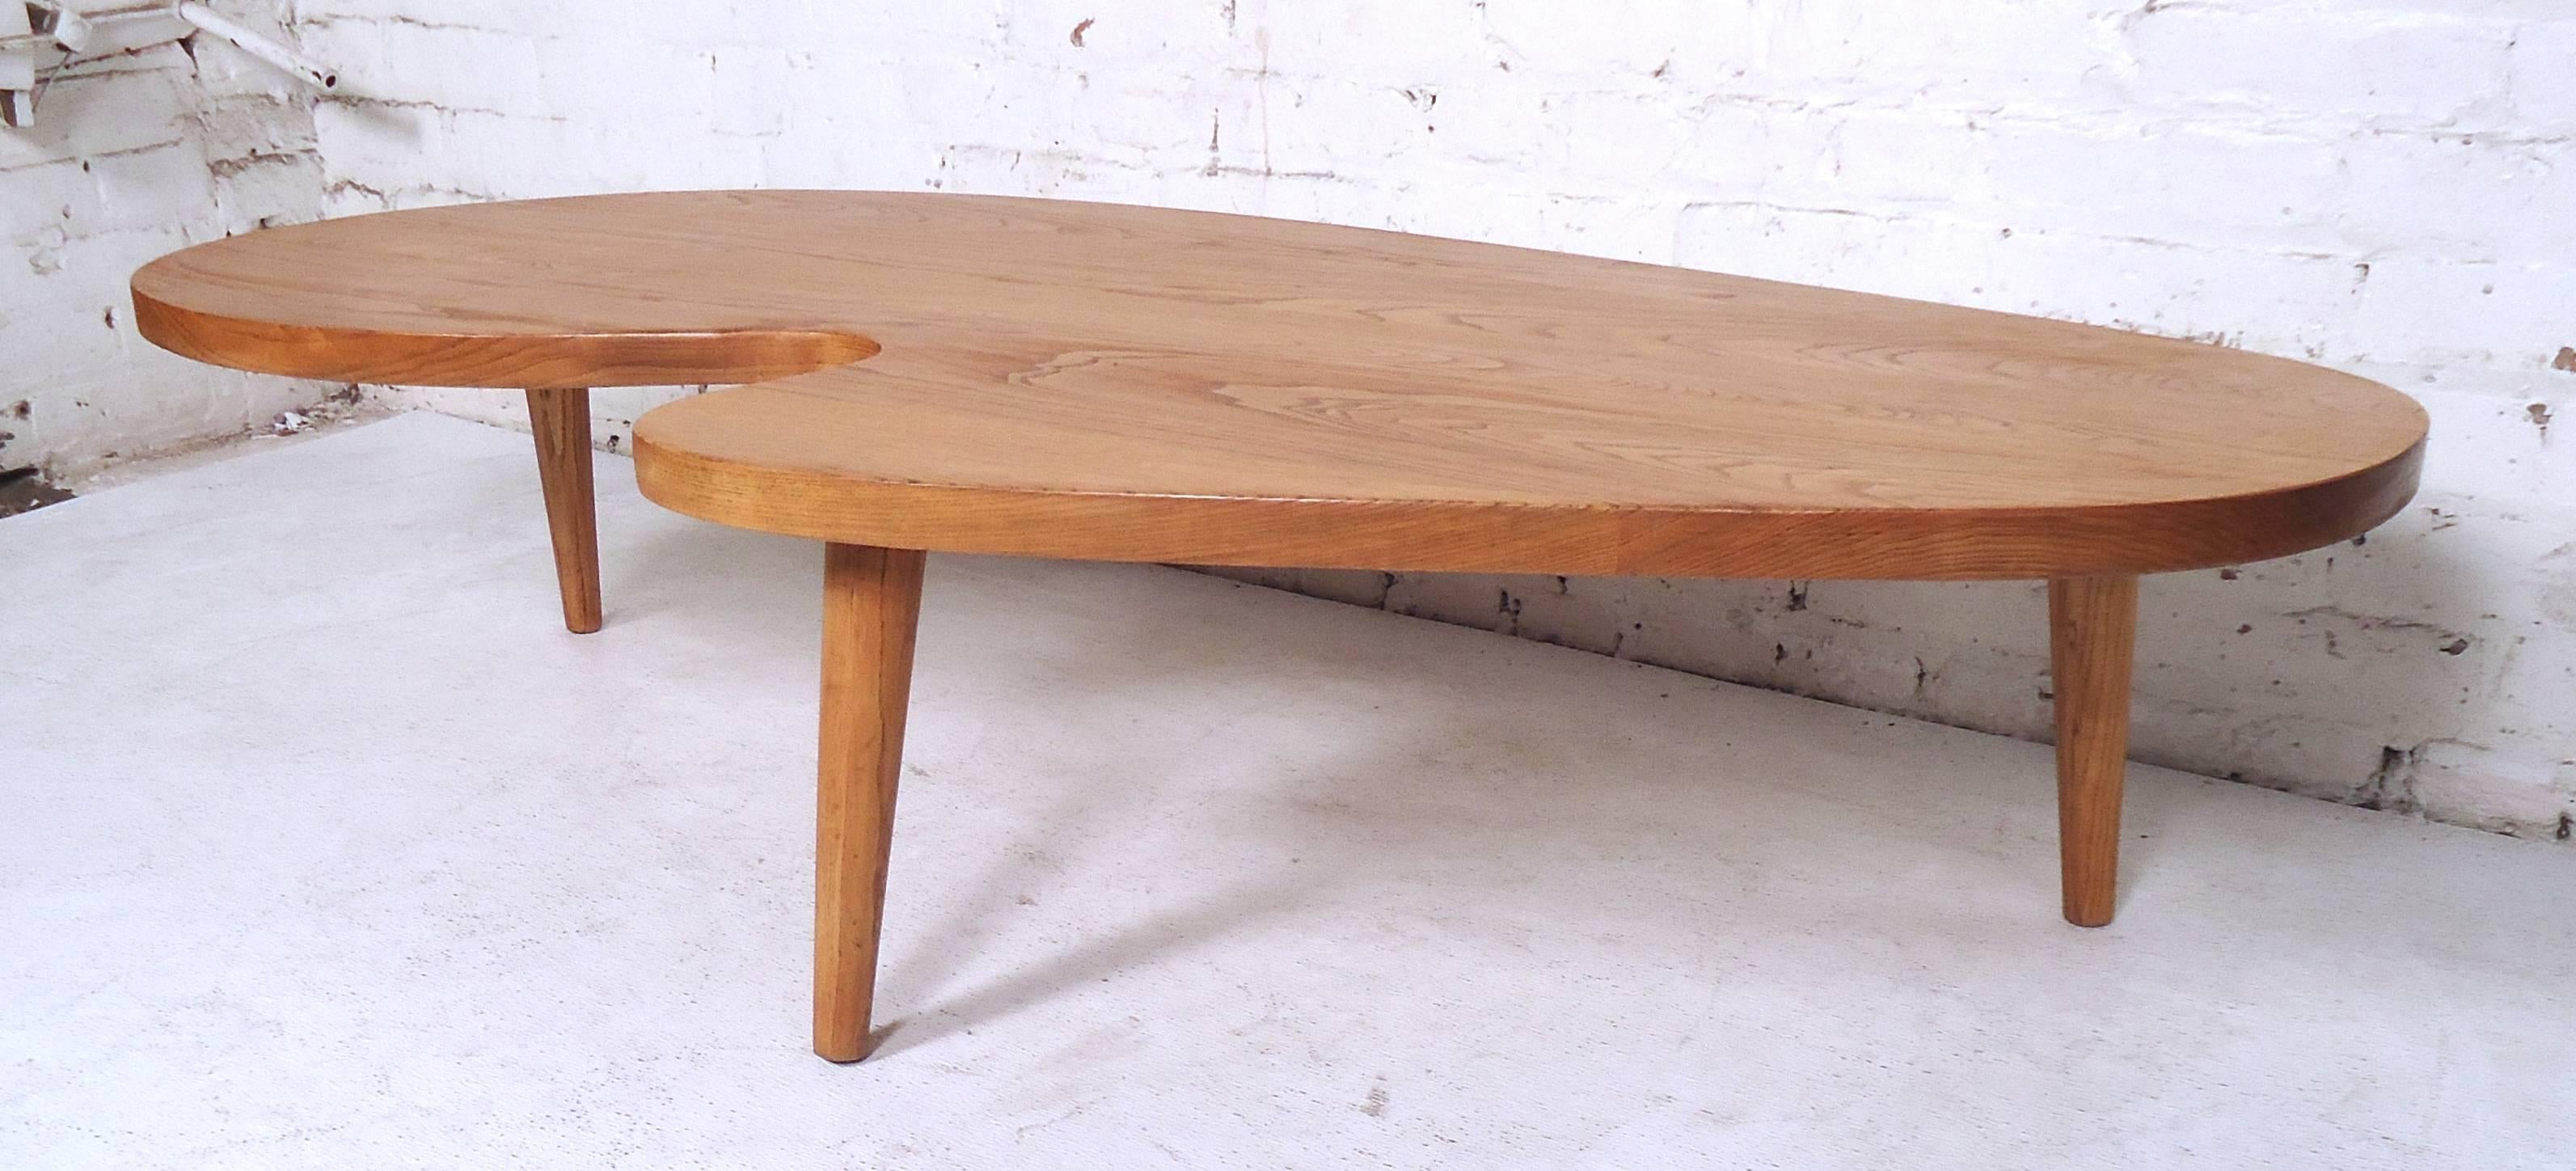 Elegant Mid-Century Modern kidney shape coffee table featuring oakwood grain and tapered legs.

(Please confirm item location - NY or NJ - with dealer).